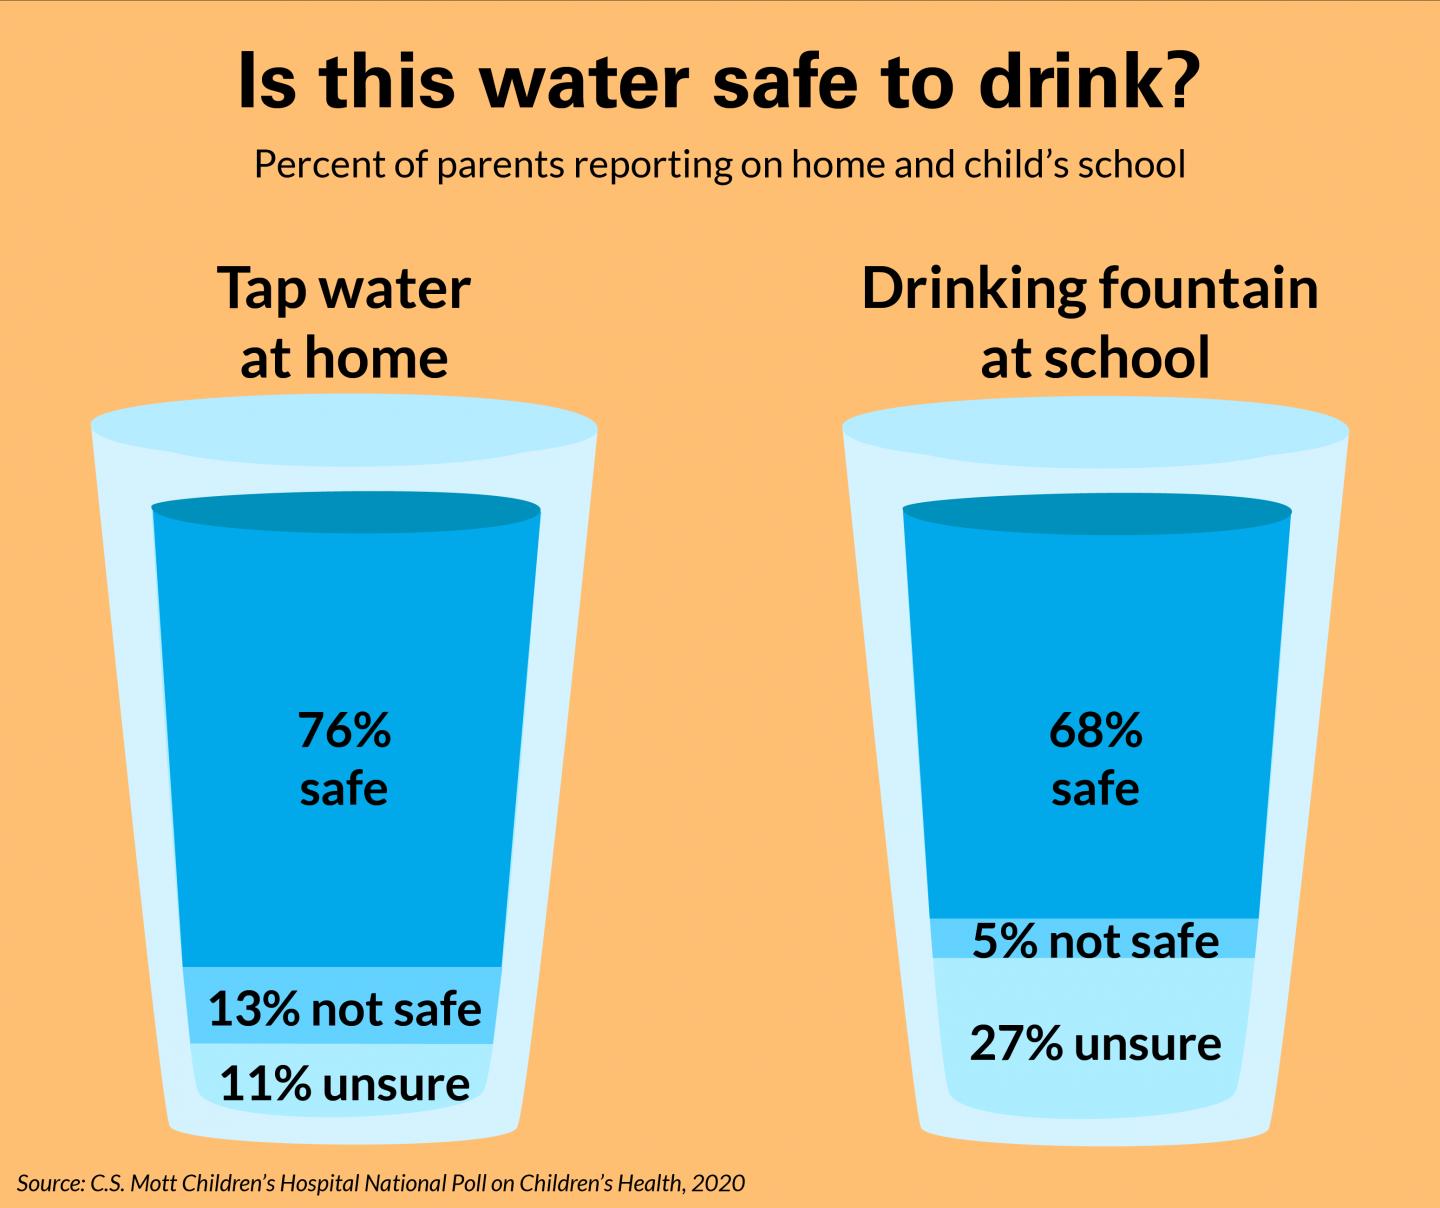 Parents' Confidence on Safety of Drinking Water at Home and School